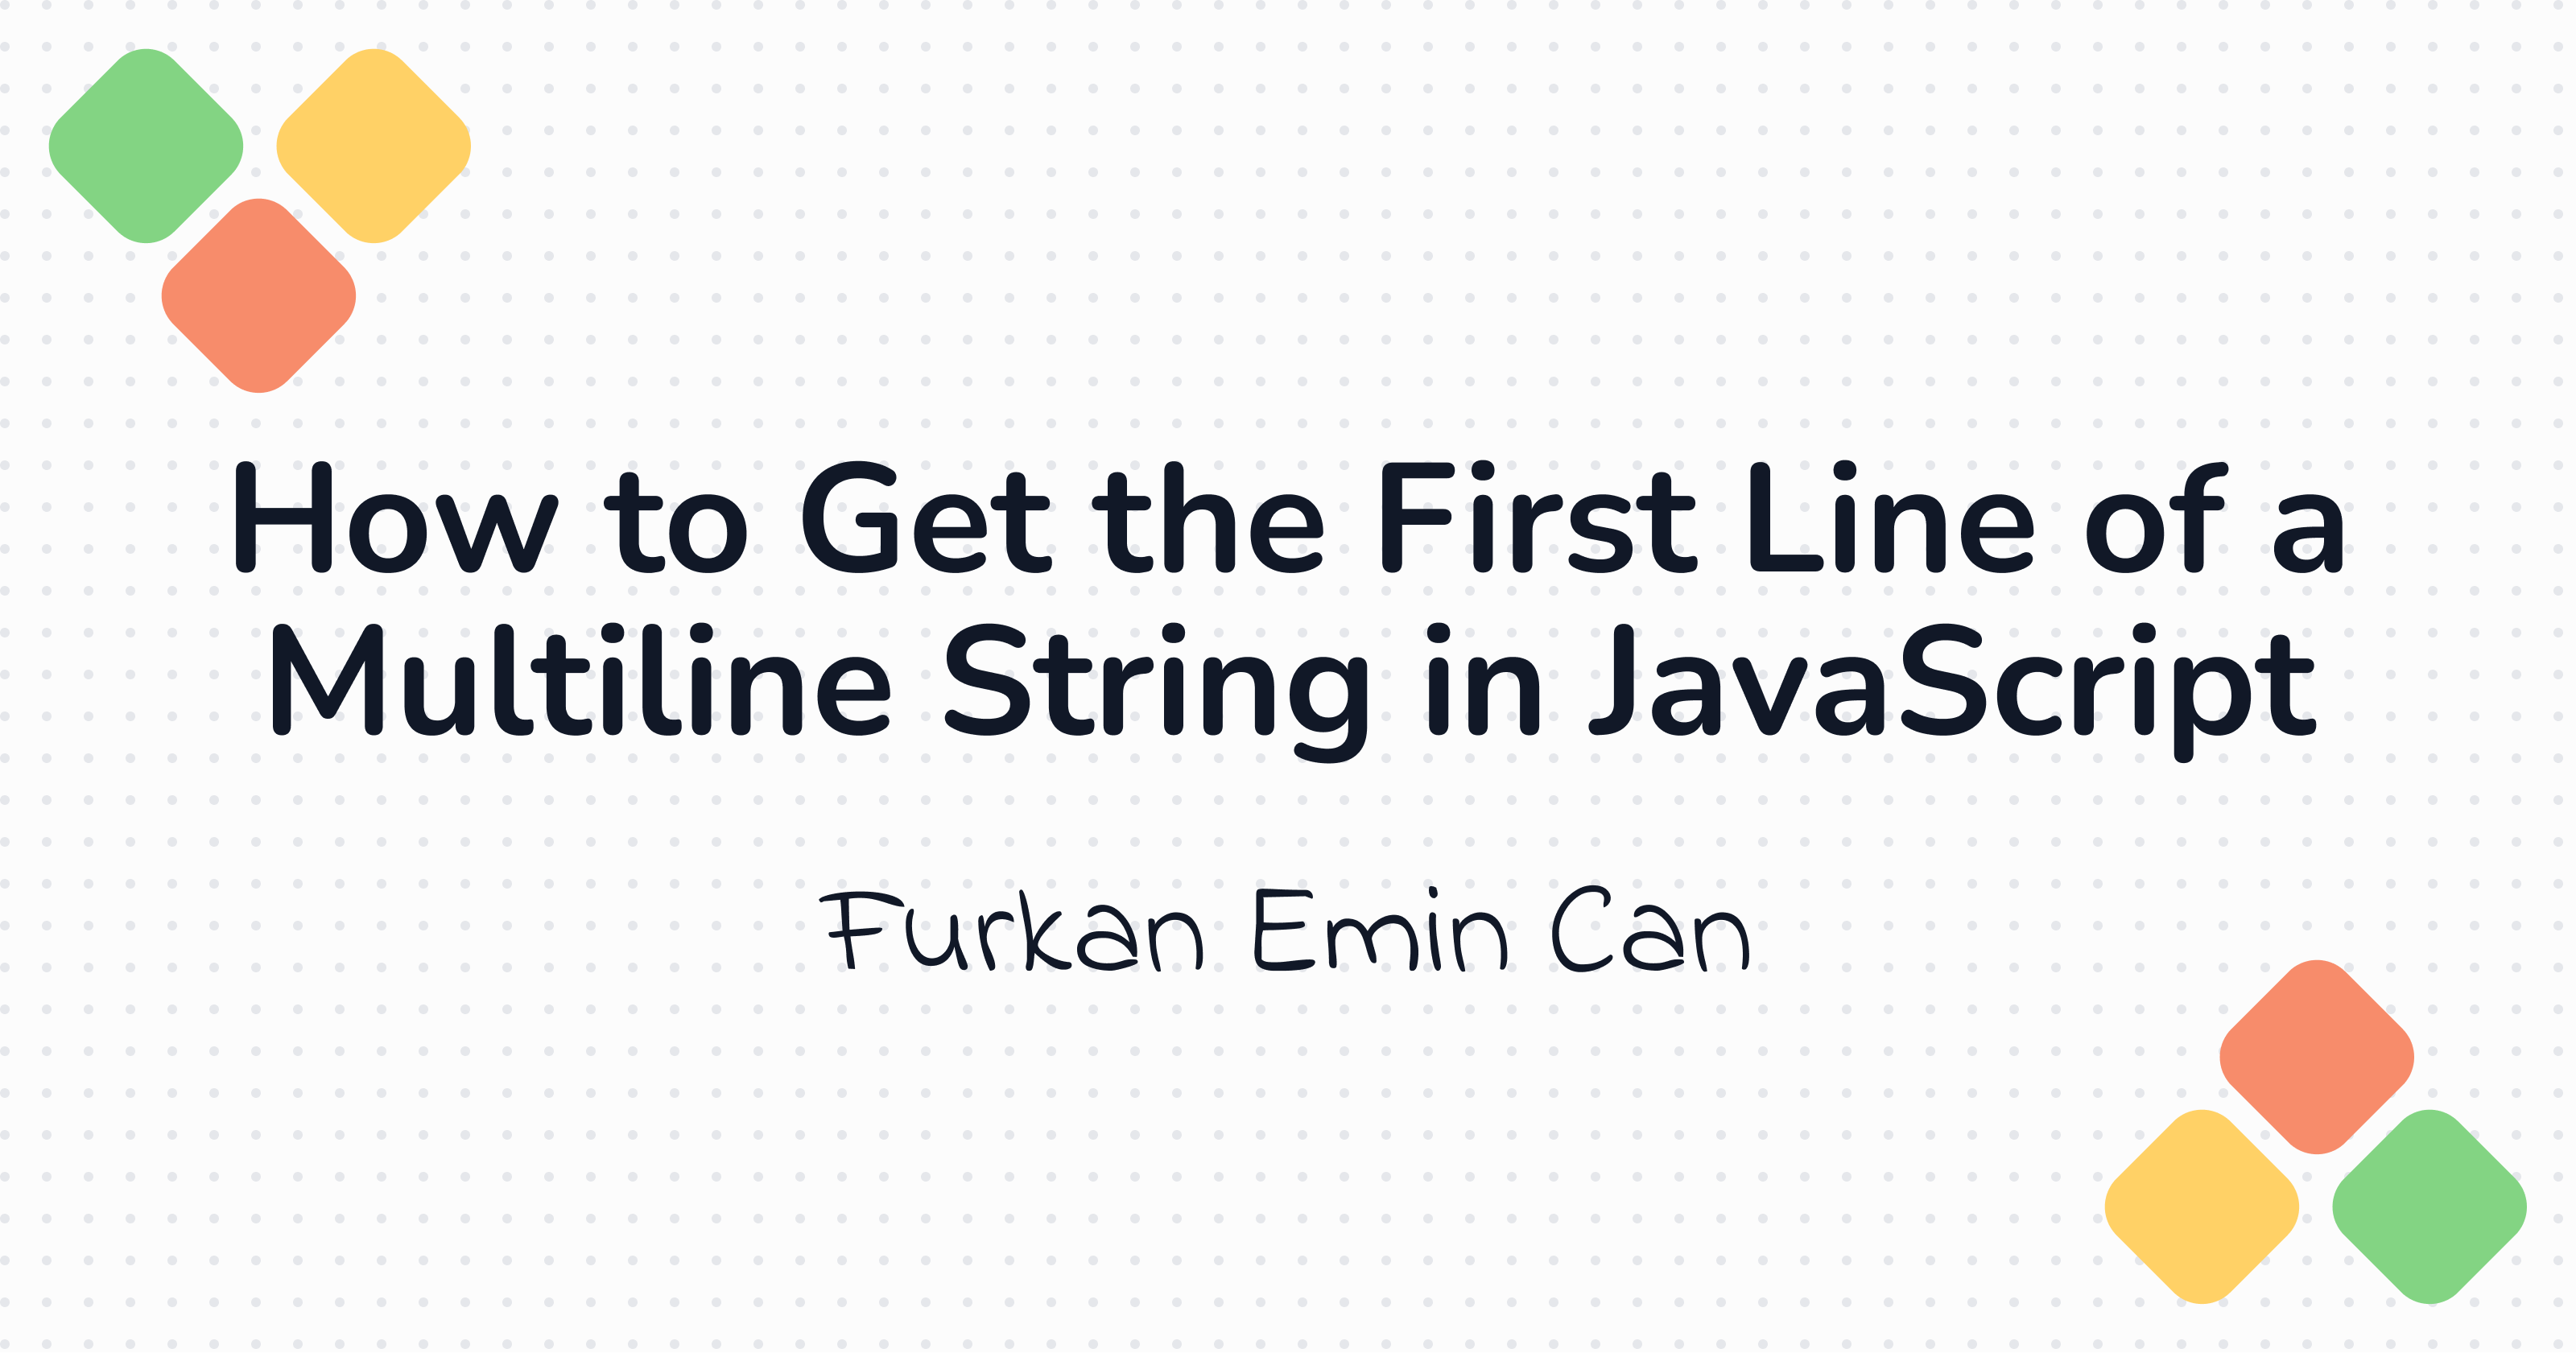 How to Get the First Line of a Multiline String in JavaScript